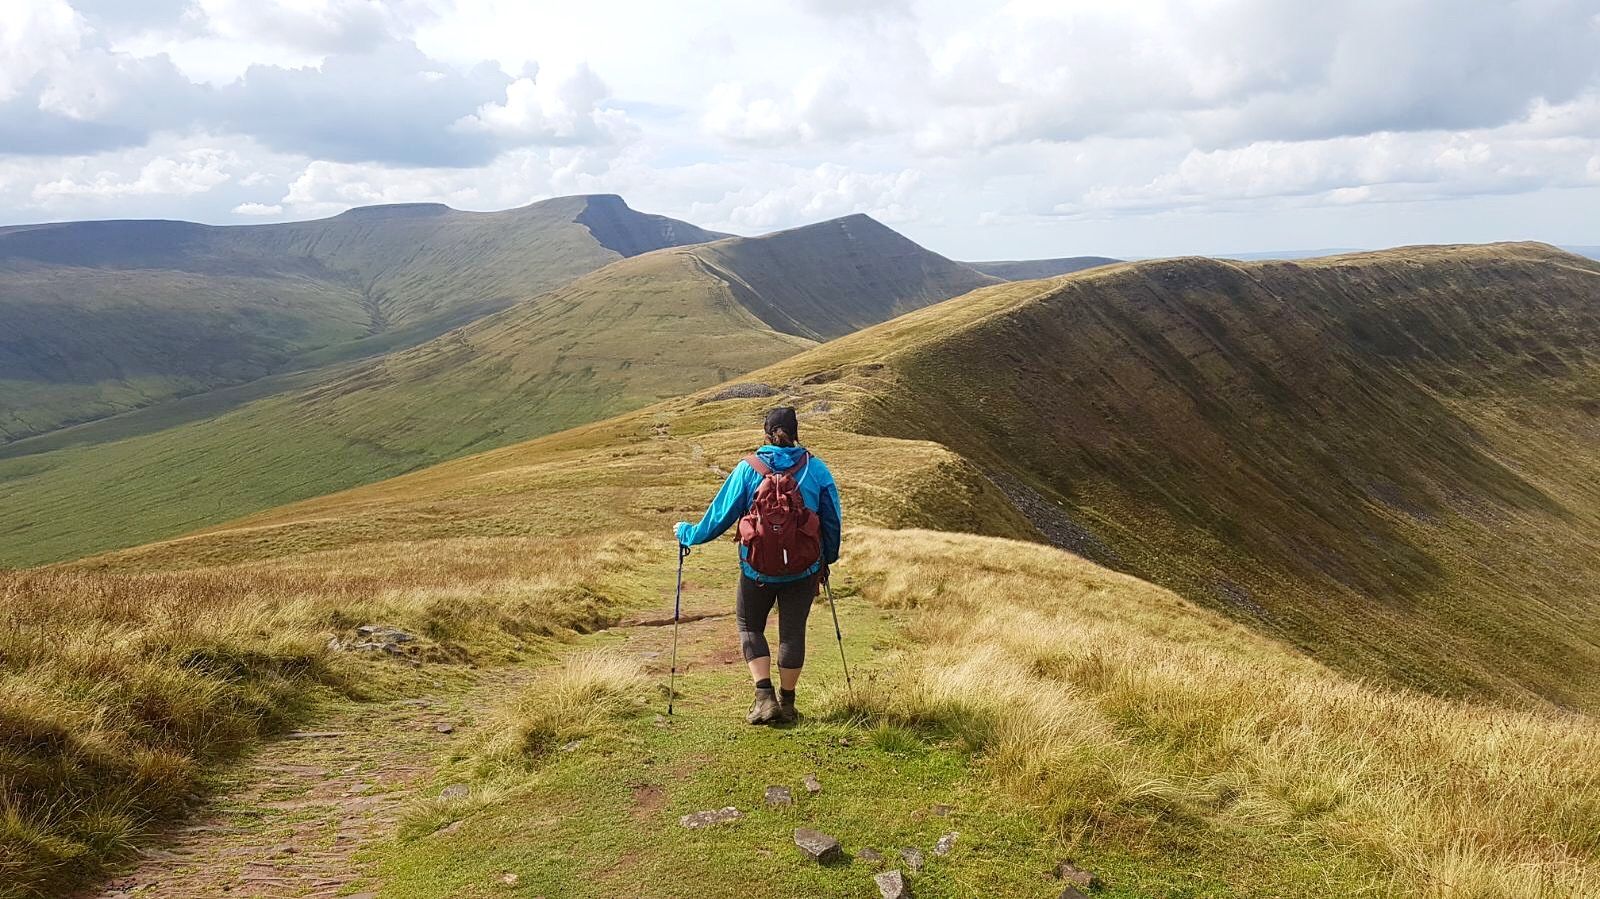 Steph Wetherell, hiking in the UK